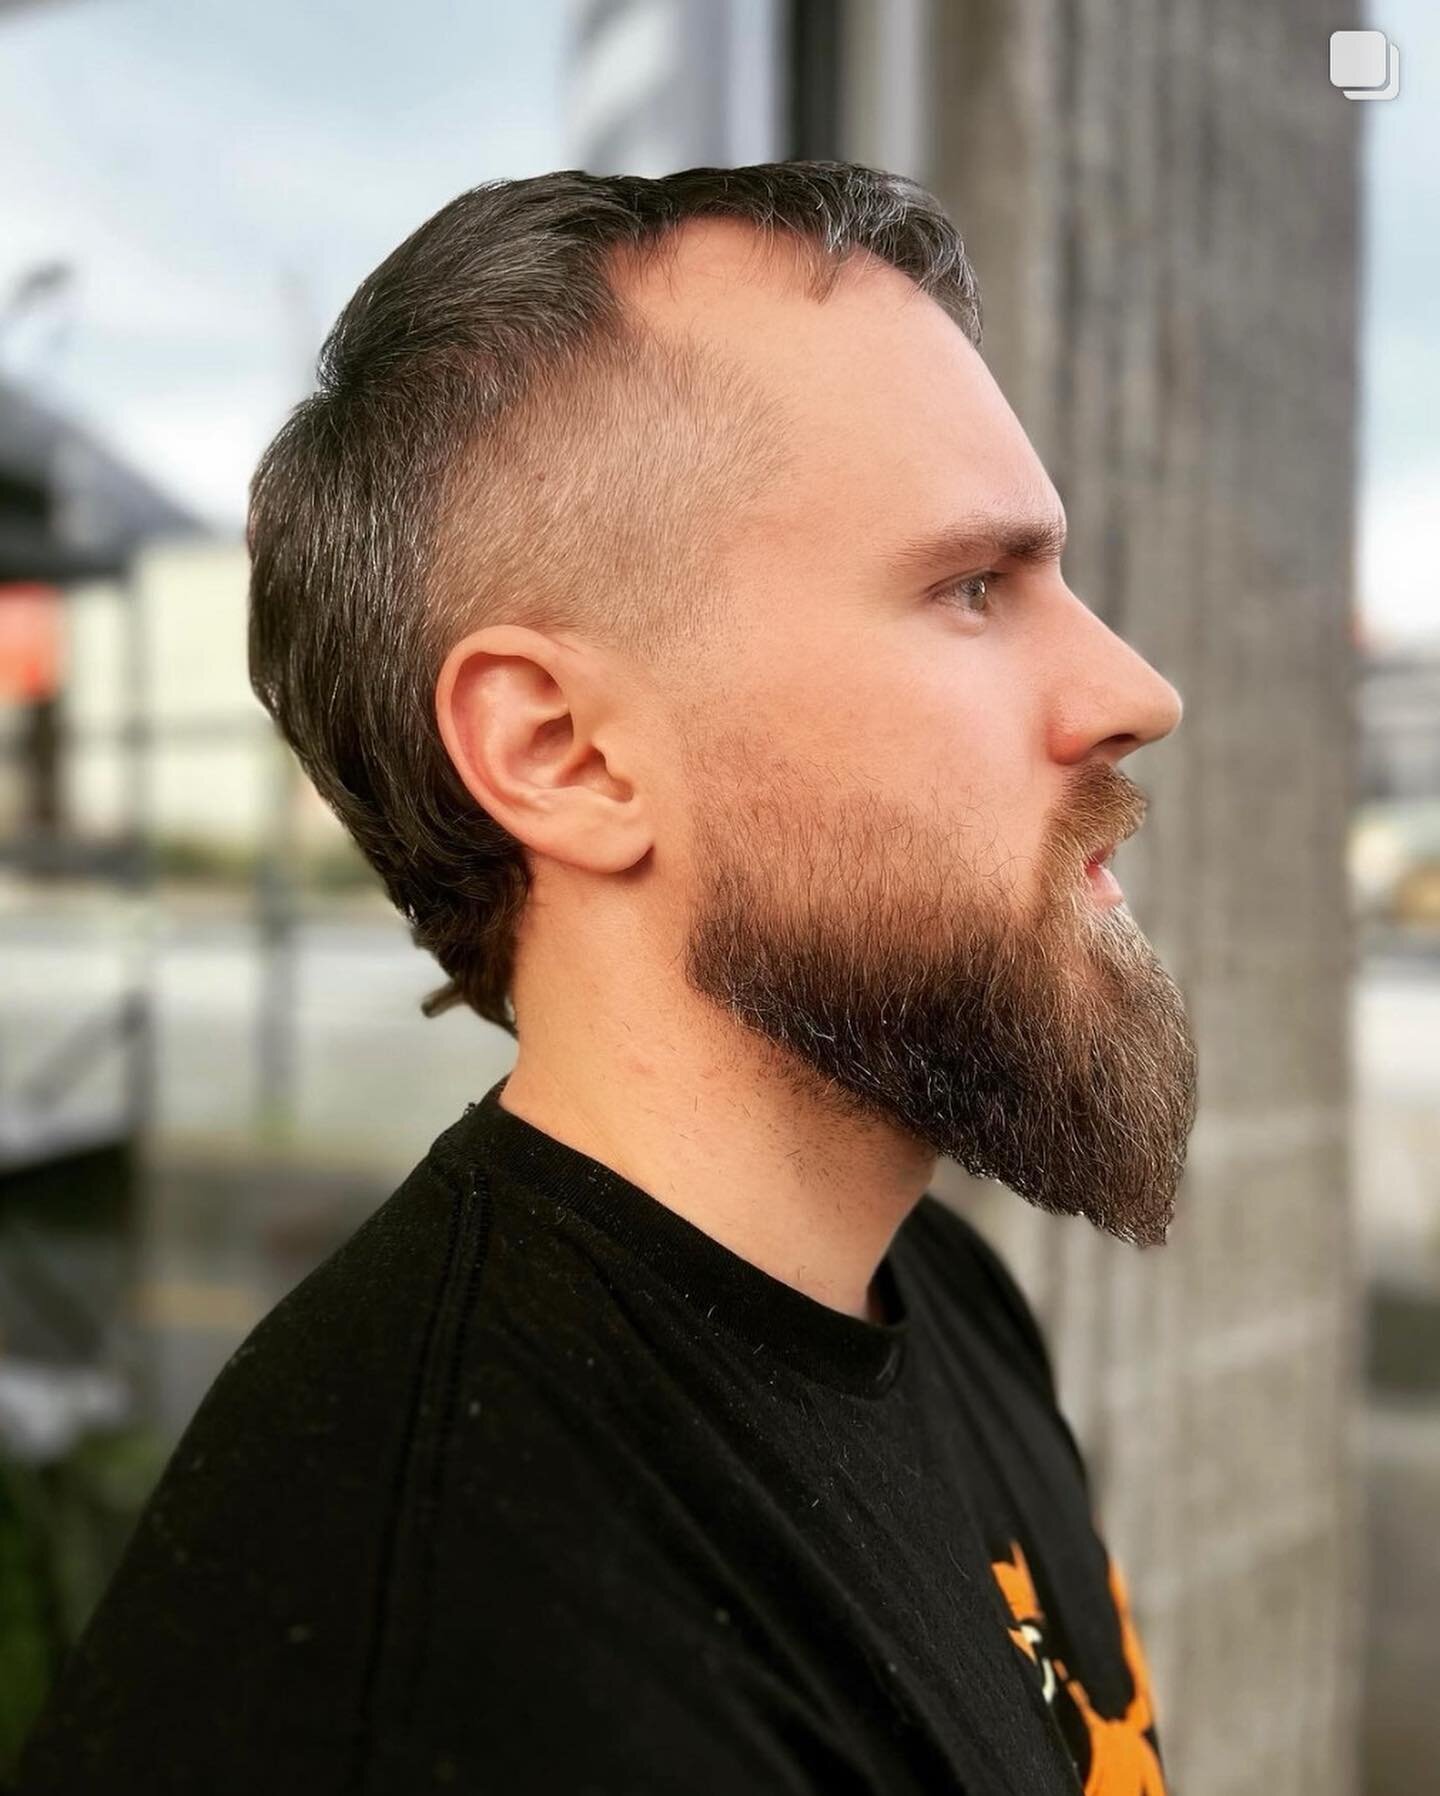 Faded modern mullet + beard trim
➖
Swipe for before photo 👀 Service by our barber, Emily. Check out her work here: @hairofthefox 
 
#noblehousesquamish